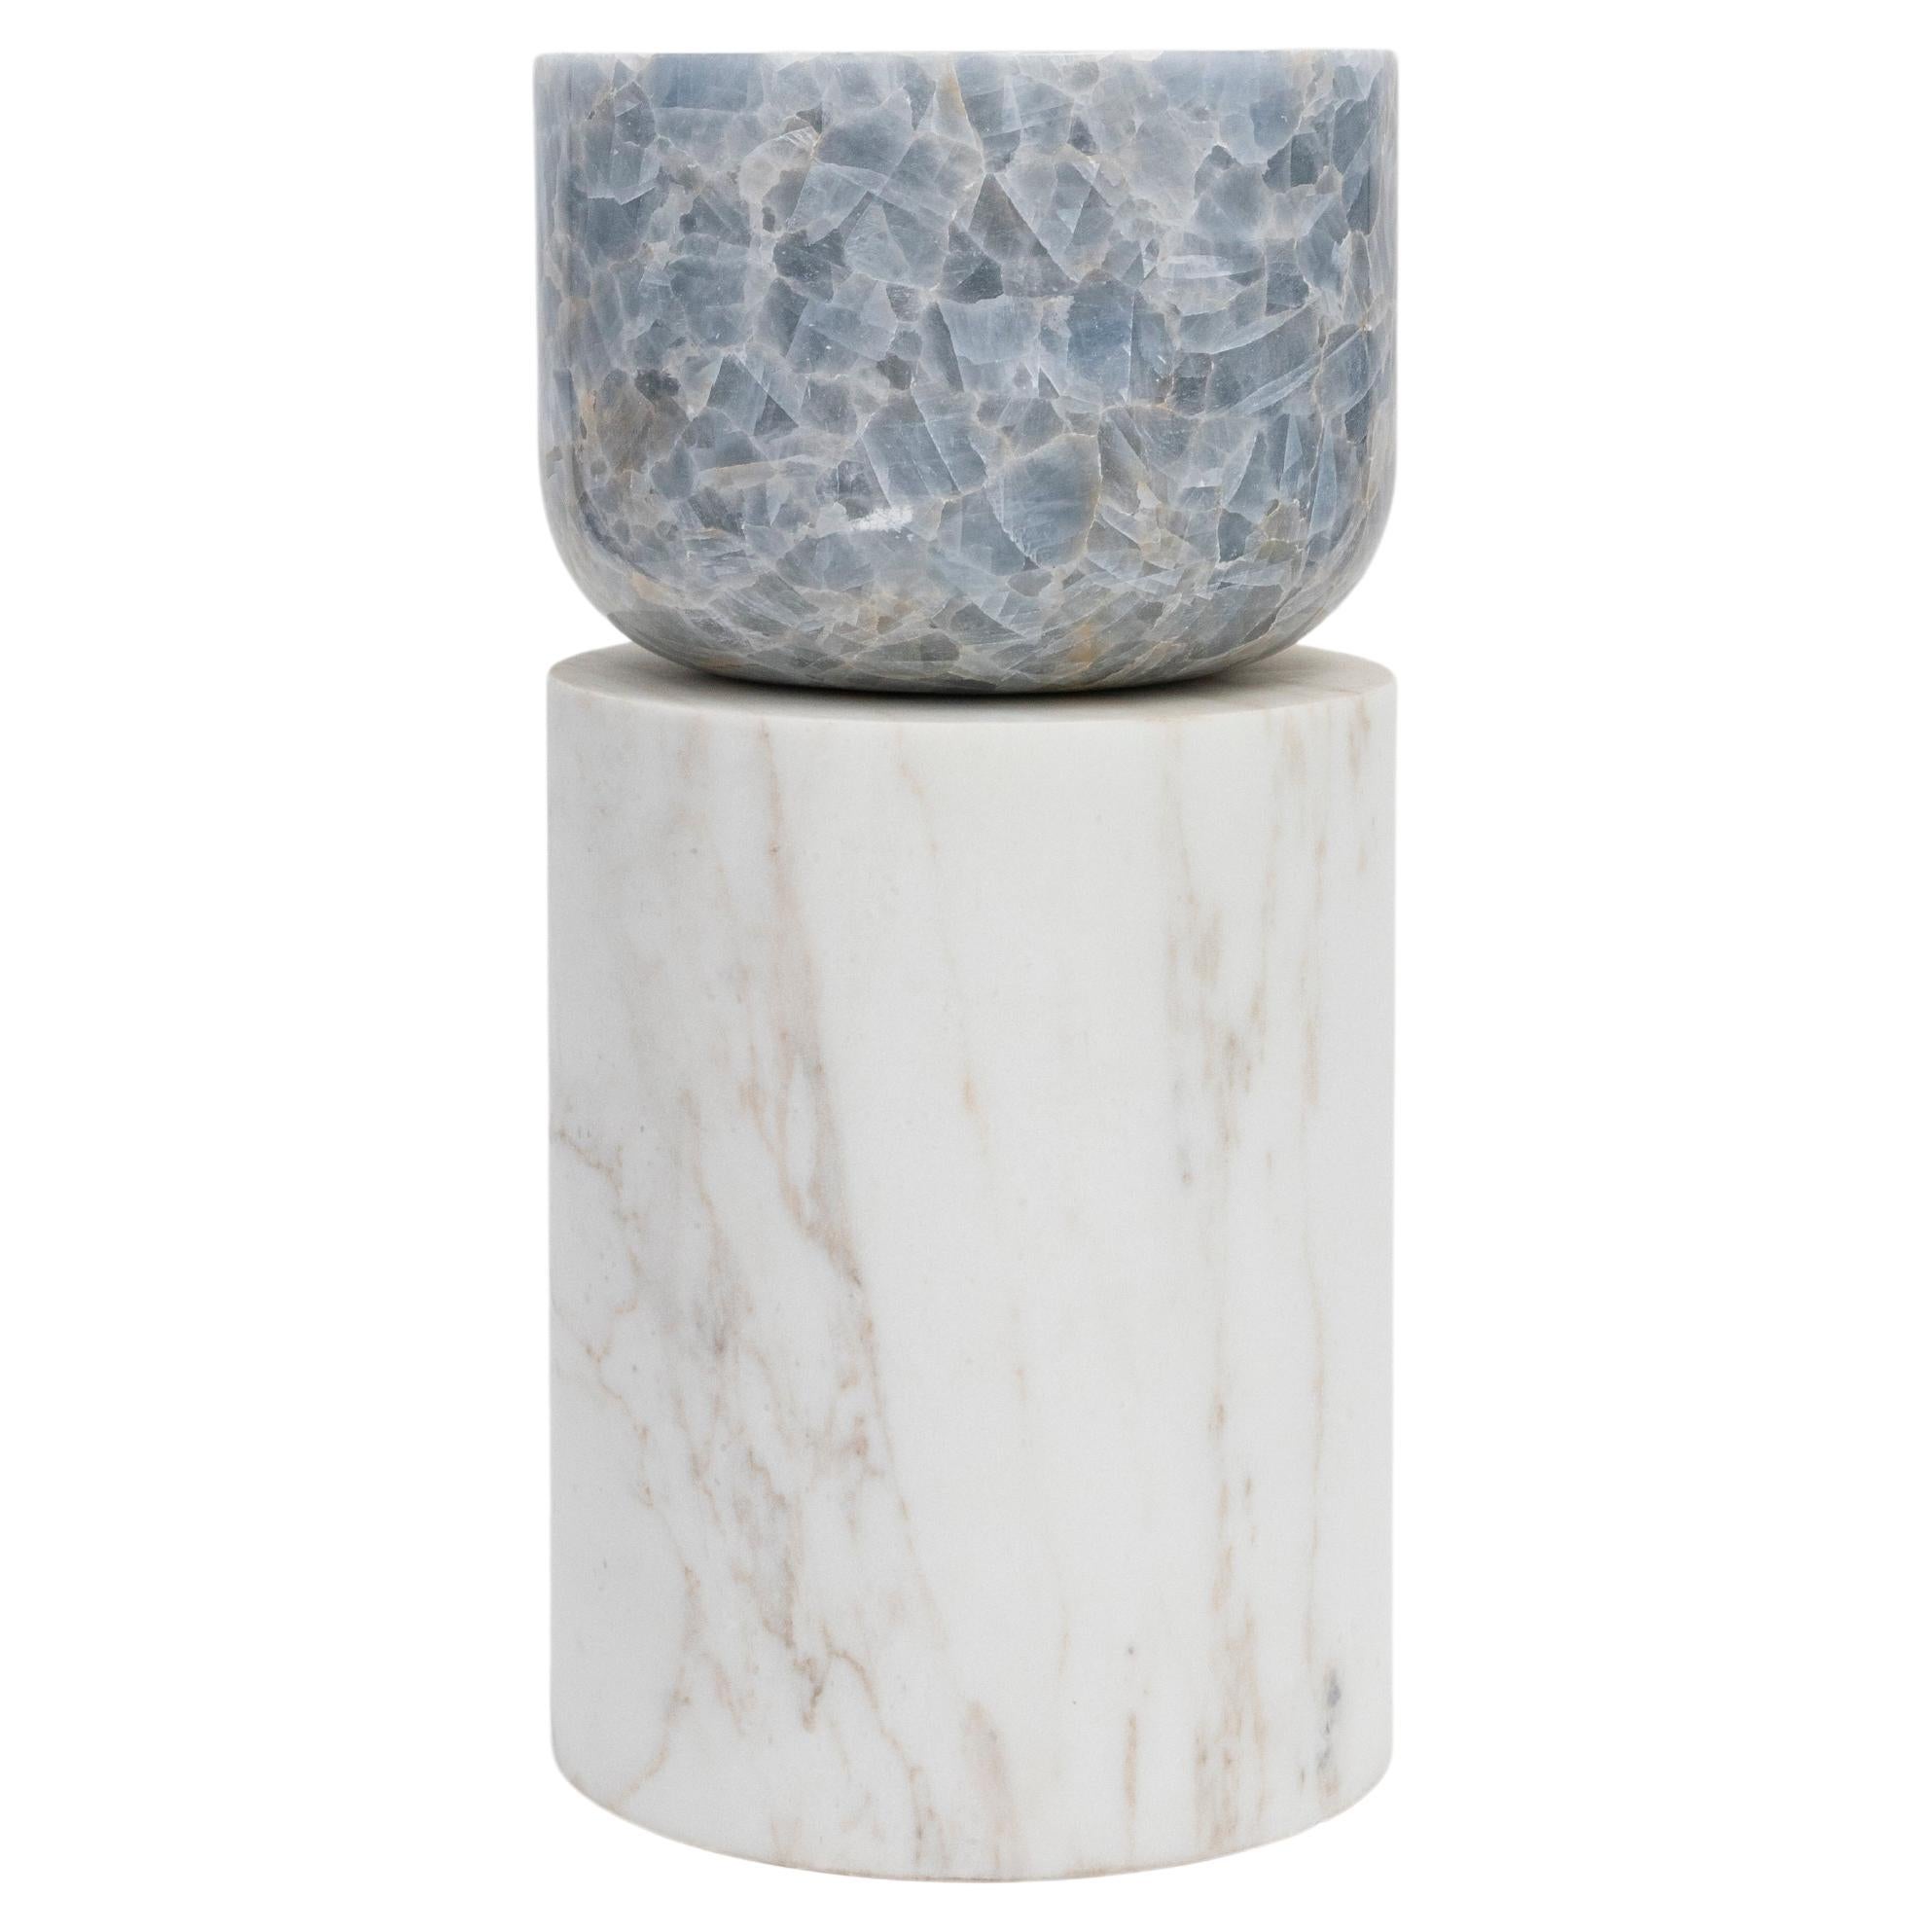 Materials: Golden Calacatta marble and blue calcite
Indoors and outdoors
Side table / Stool

While, in principle, marble bears not a volcanic origin, the veiny, fine-grained Yule marble employed for this variation of Sten Studio’s distinctive stools